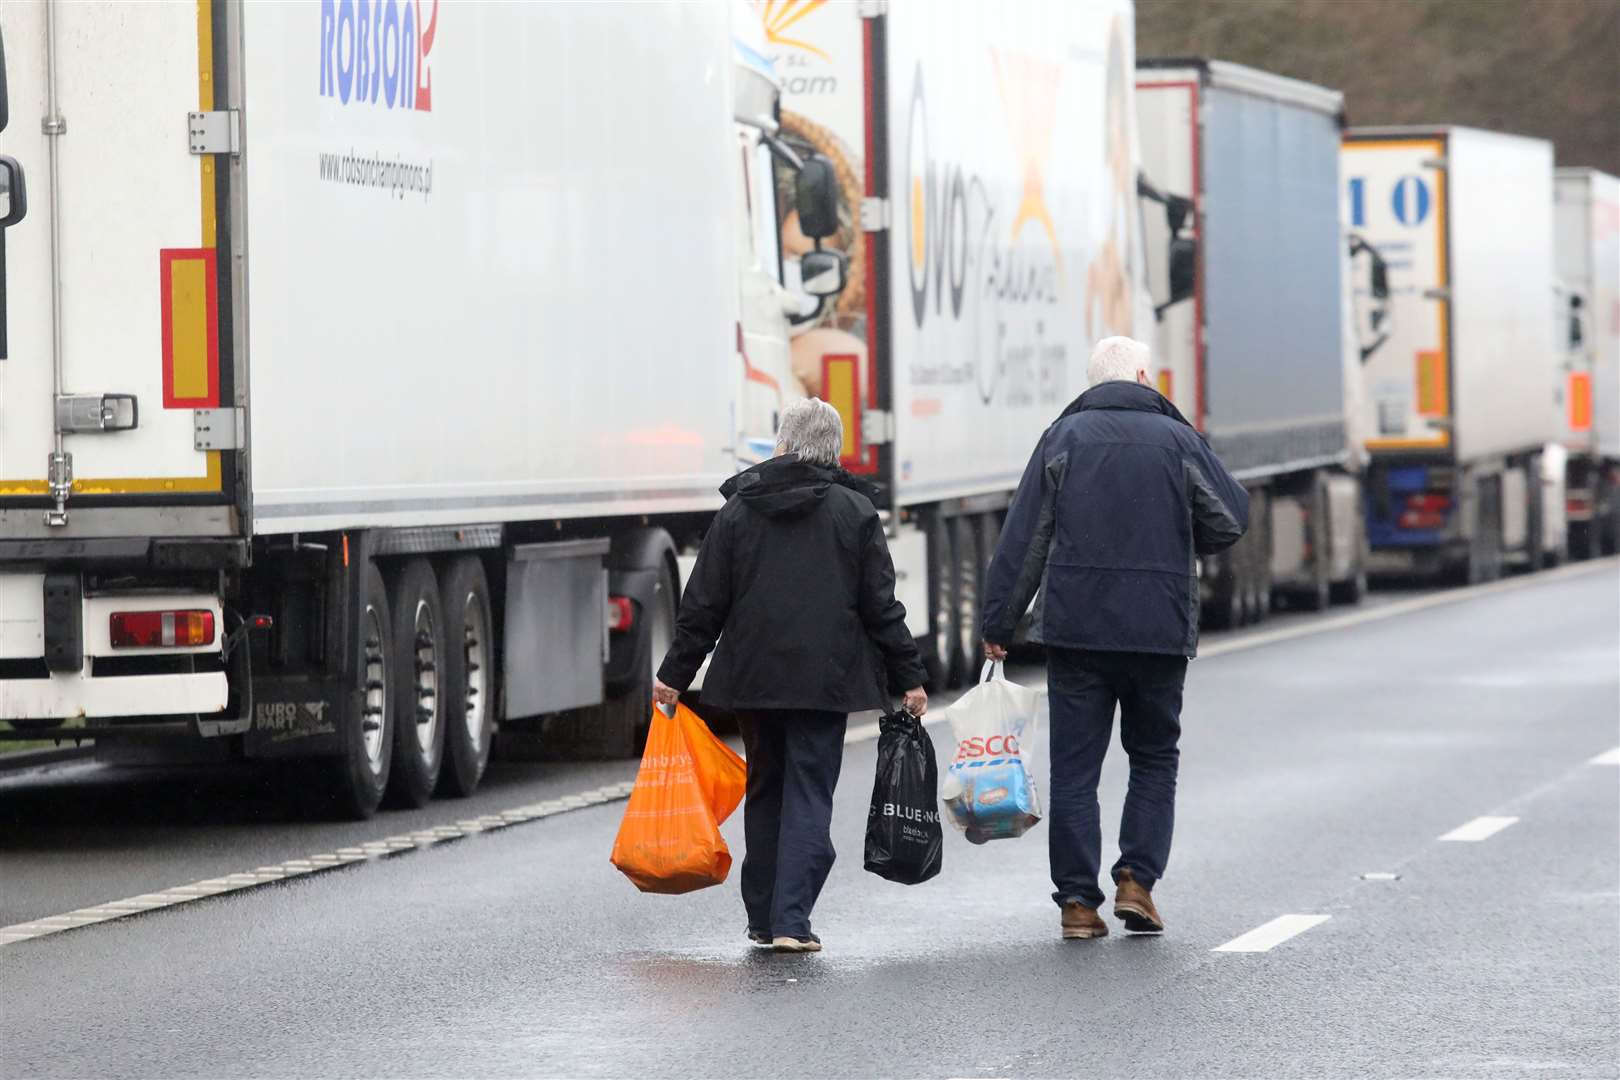 While some villagers have lowered food from the bridges, David and Jan James walked along the M20 to dish out donations to truckers. Picture: Barry Goodwin